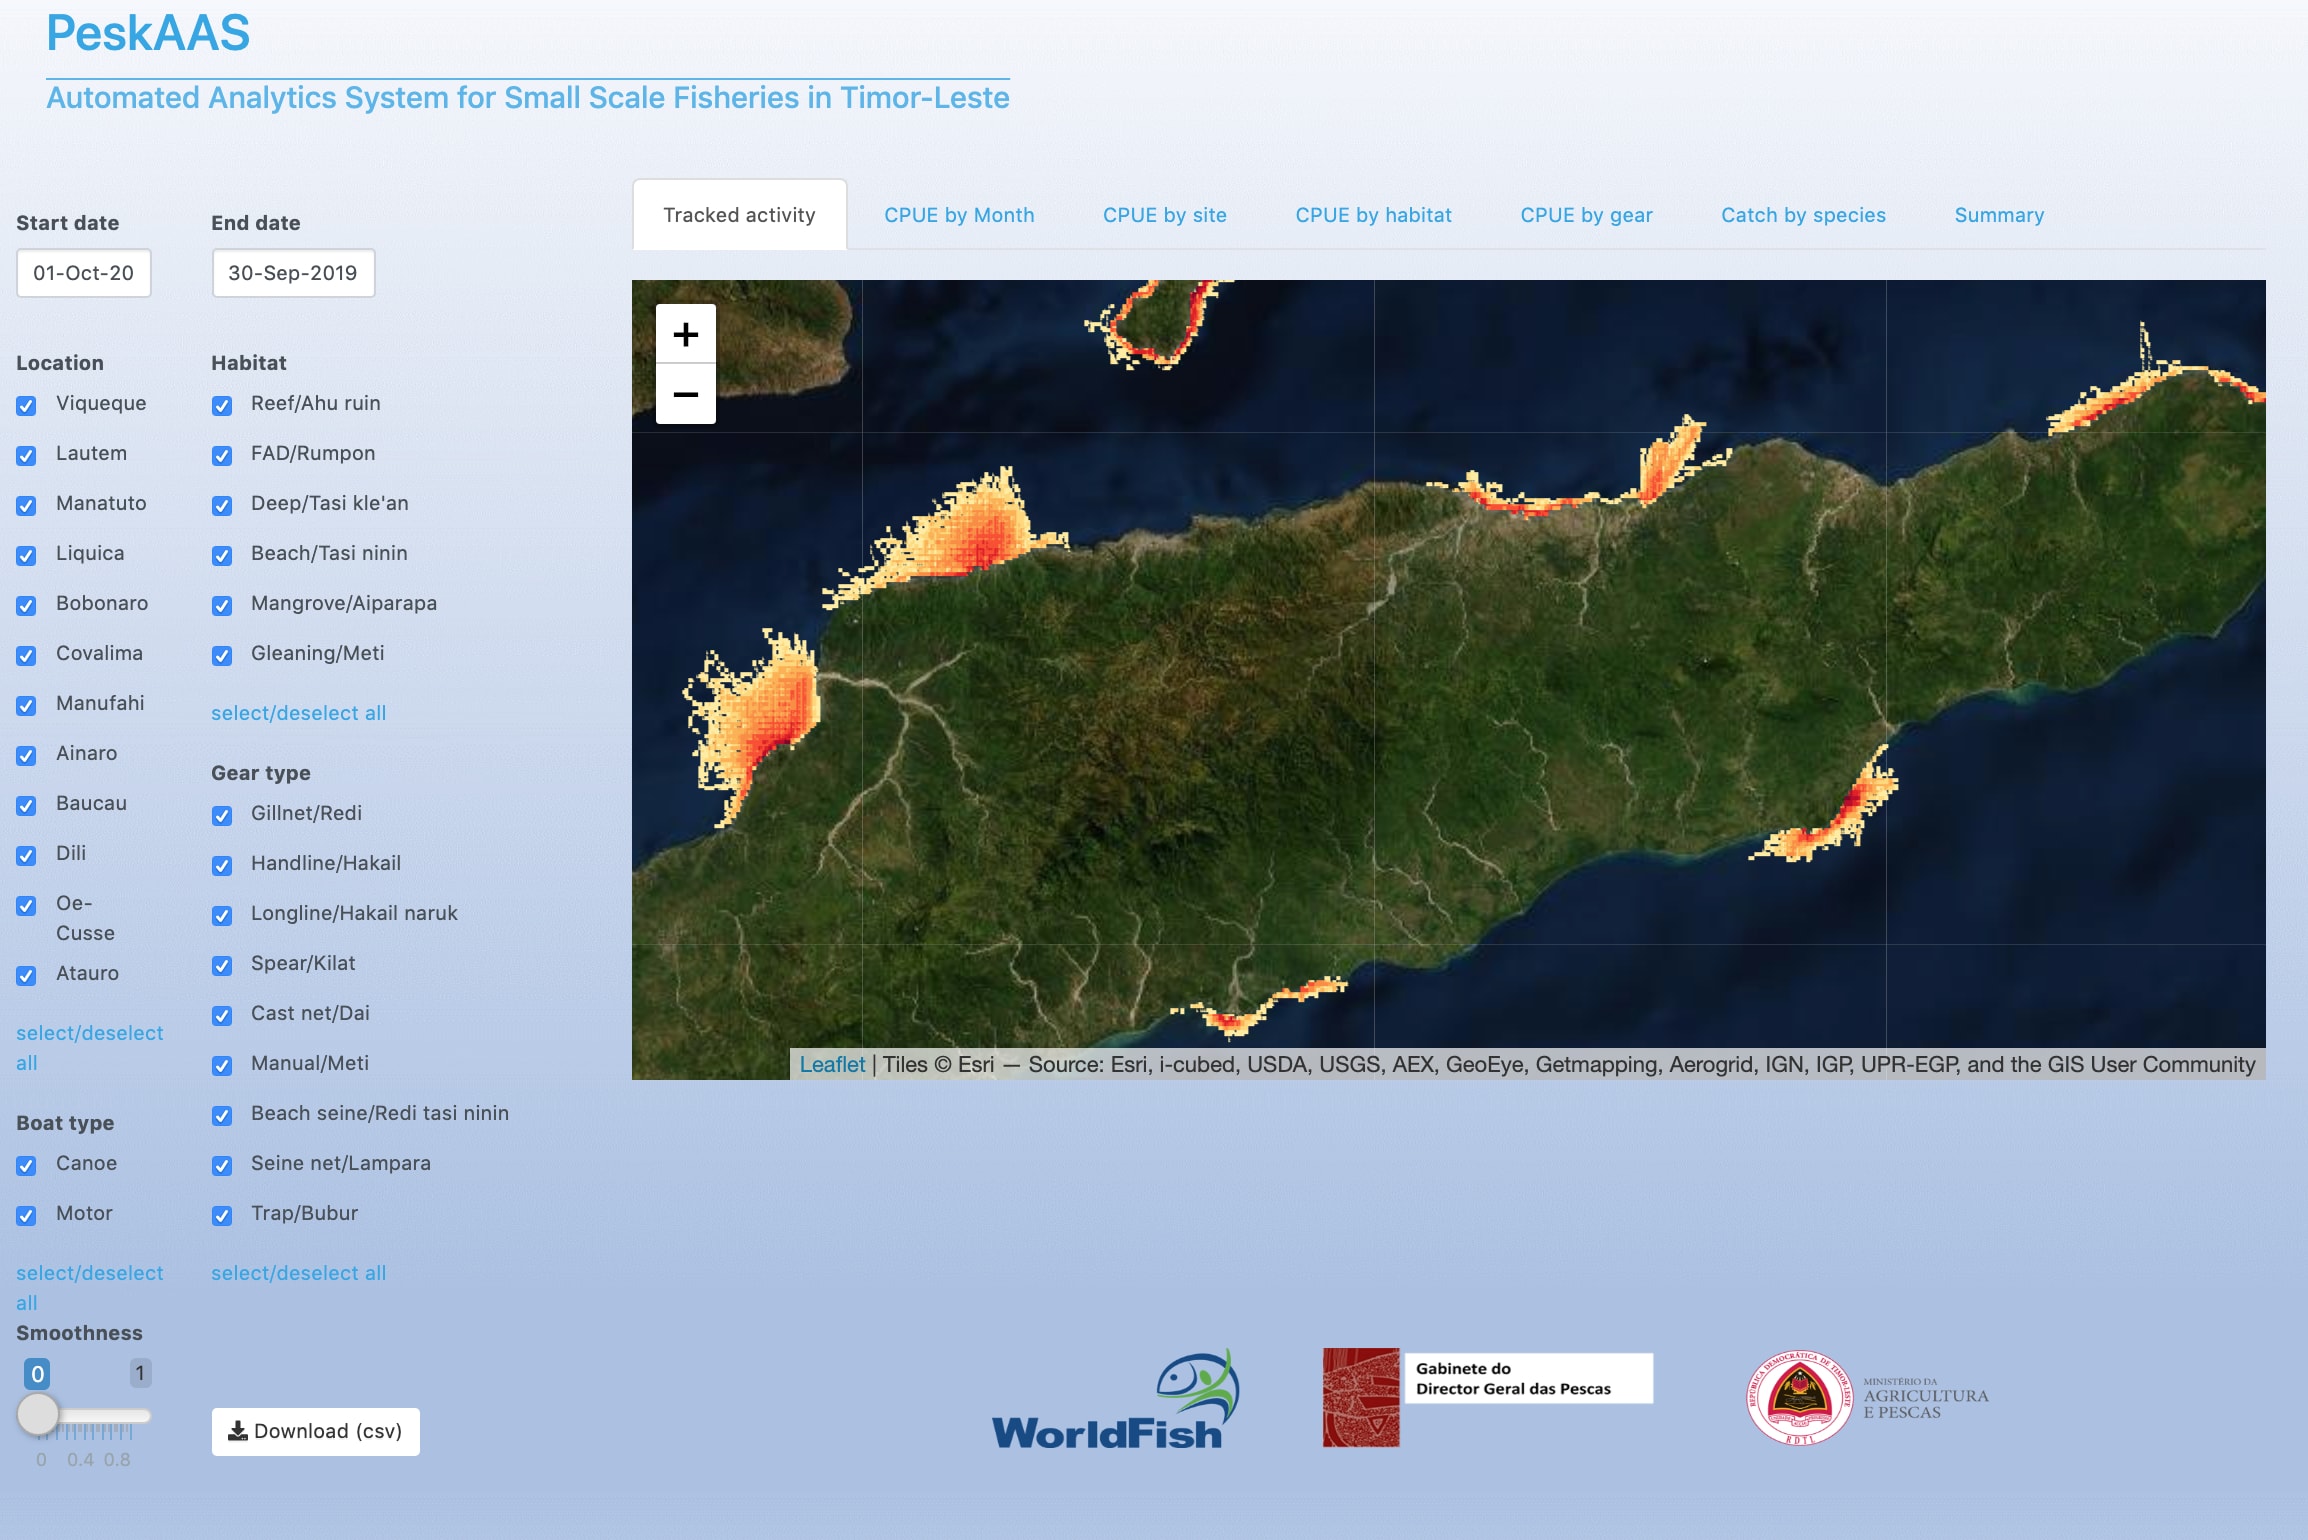 PeskAAS – Automated Analytics System for Fisheries in Timor-Leste